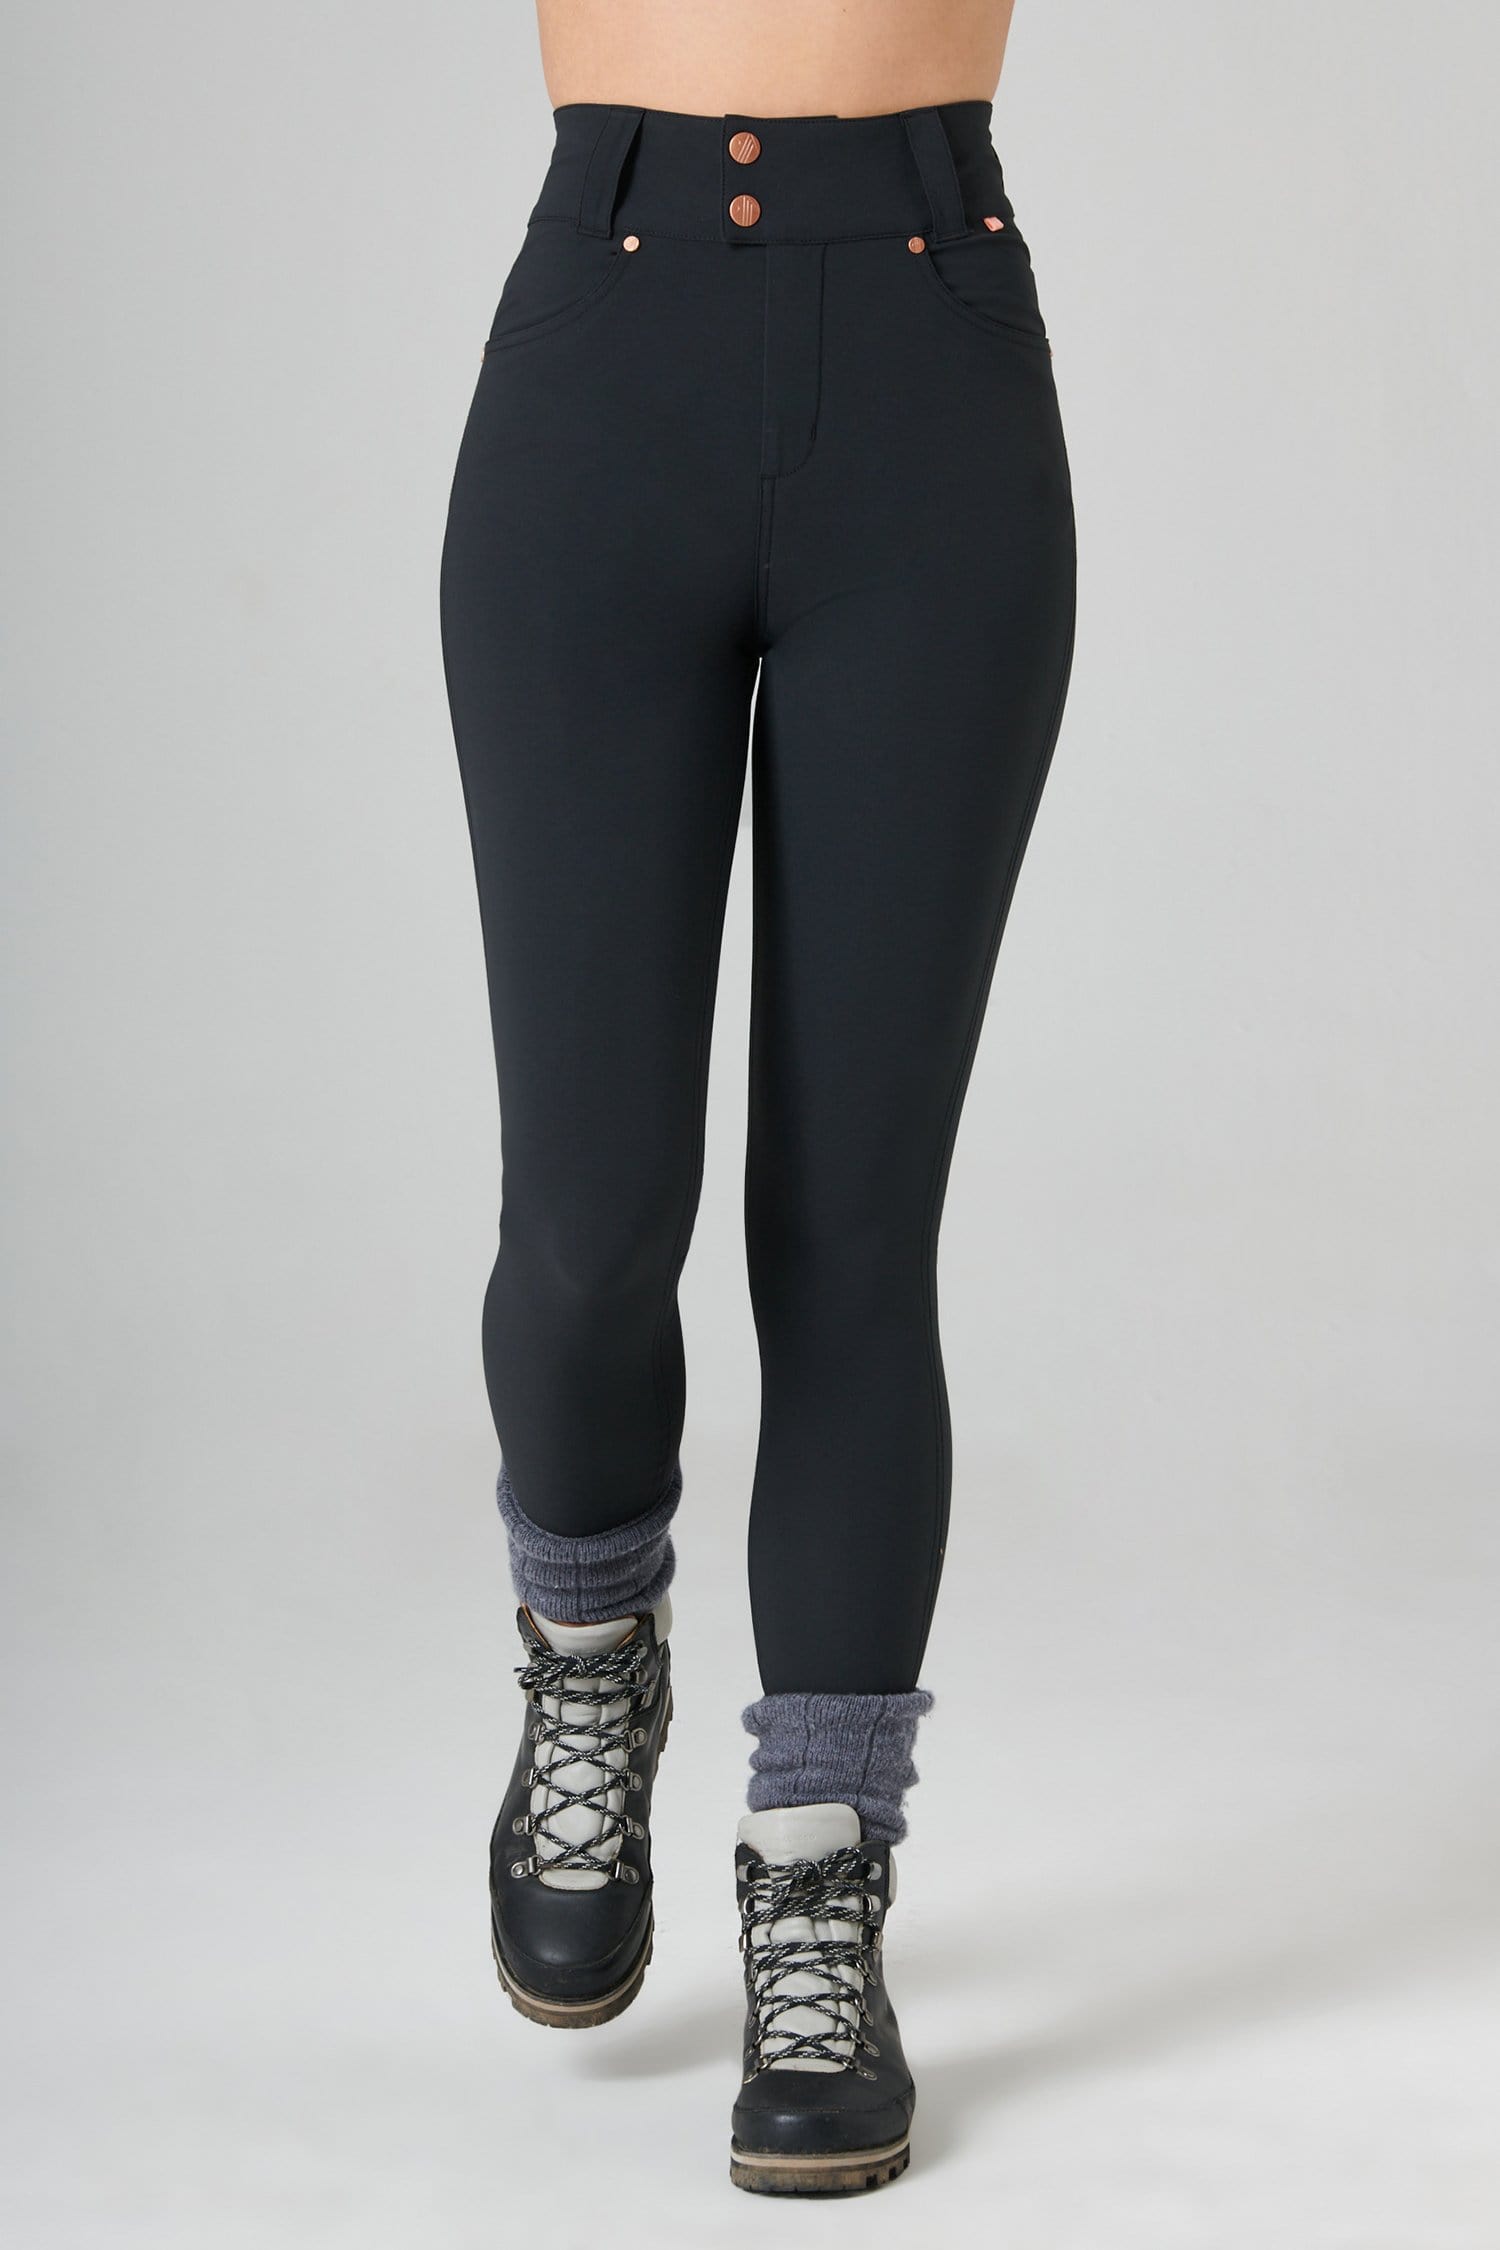 The Shape Skinny Outdoor Trousers - Black - 36r / Uk18 - Womens - Acai Outdoorwear